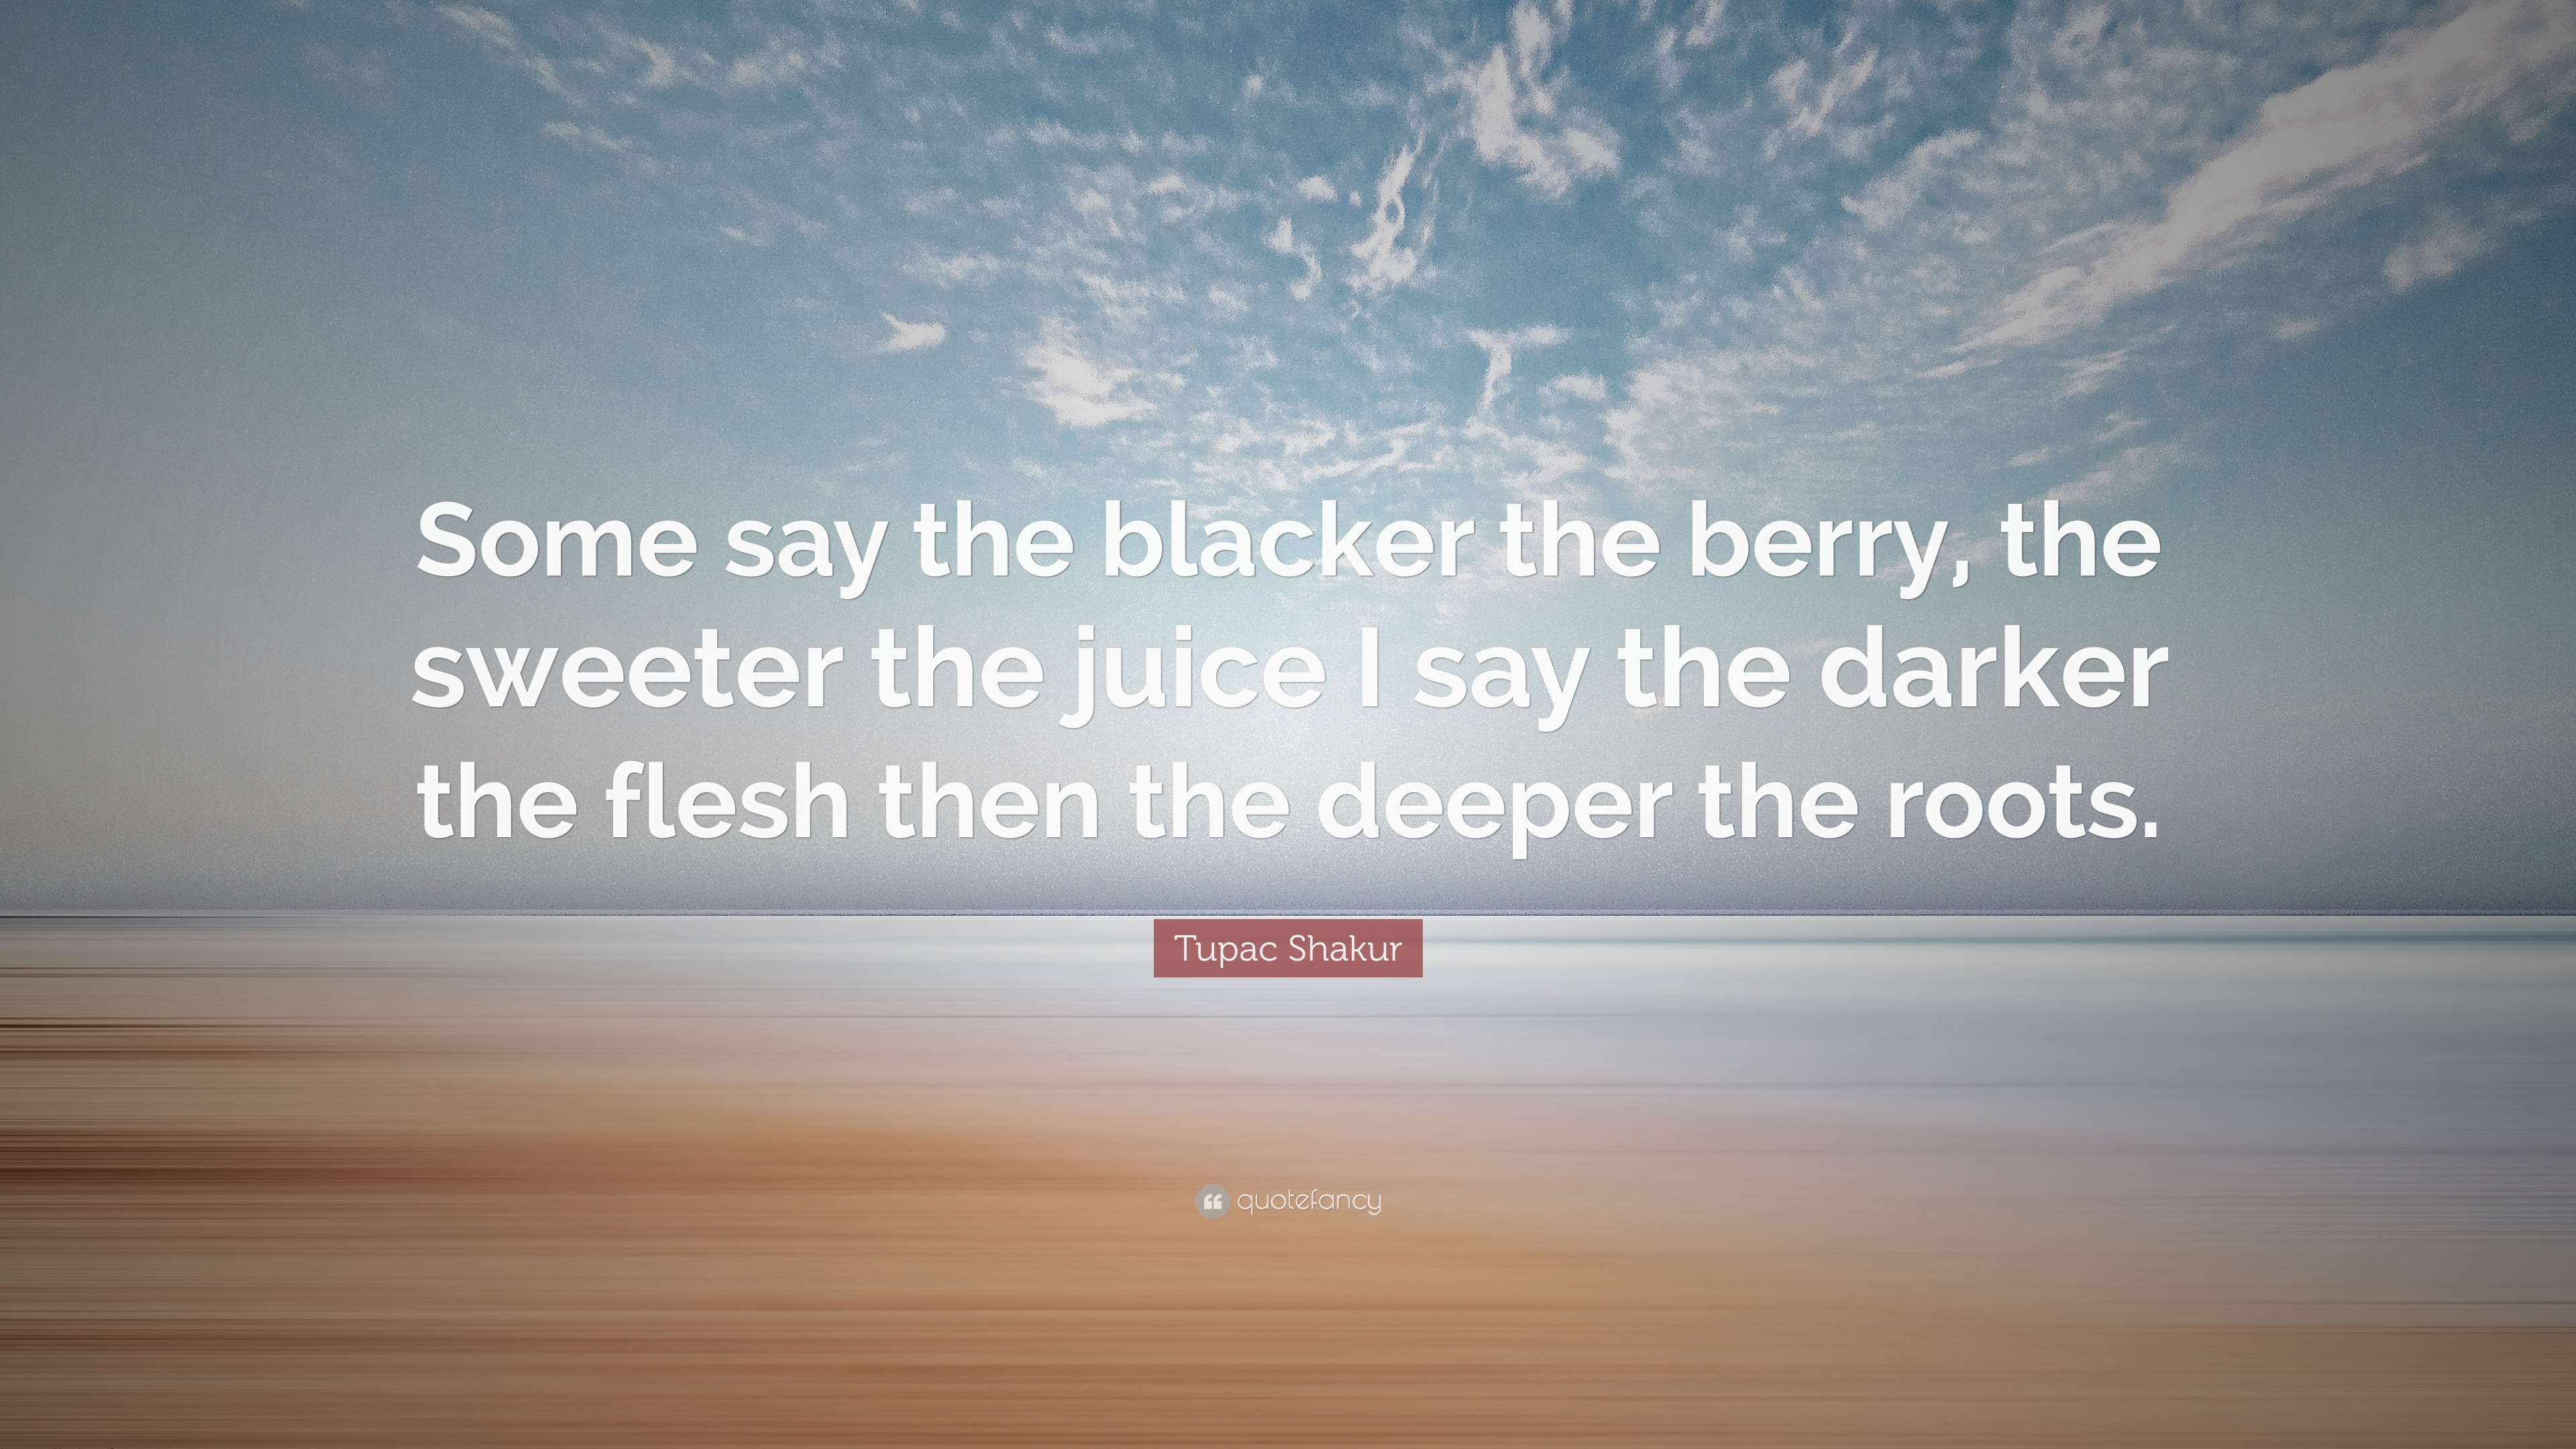 Tupac Shakur Quote: “Some say the blacker the berry, the ...